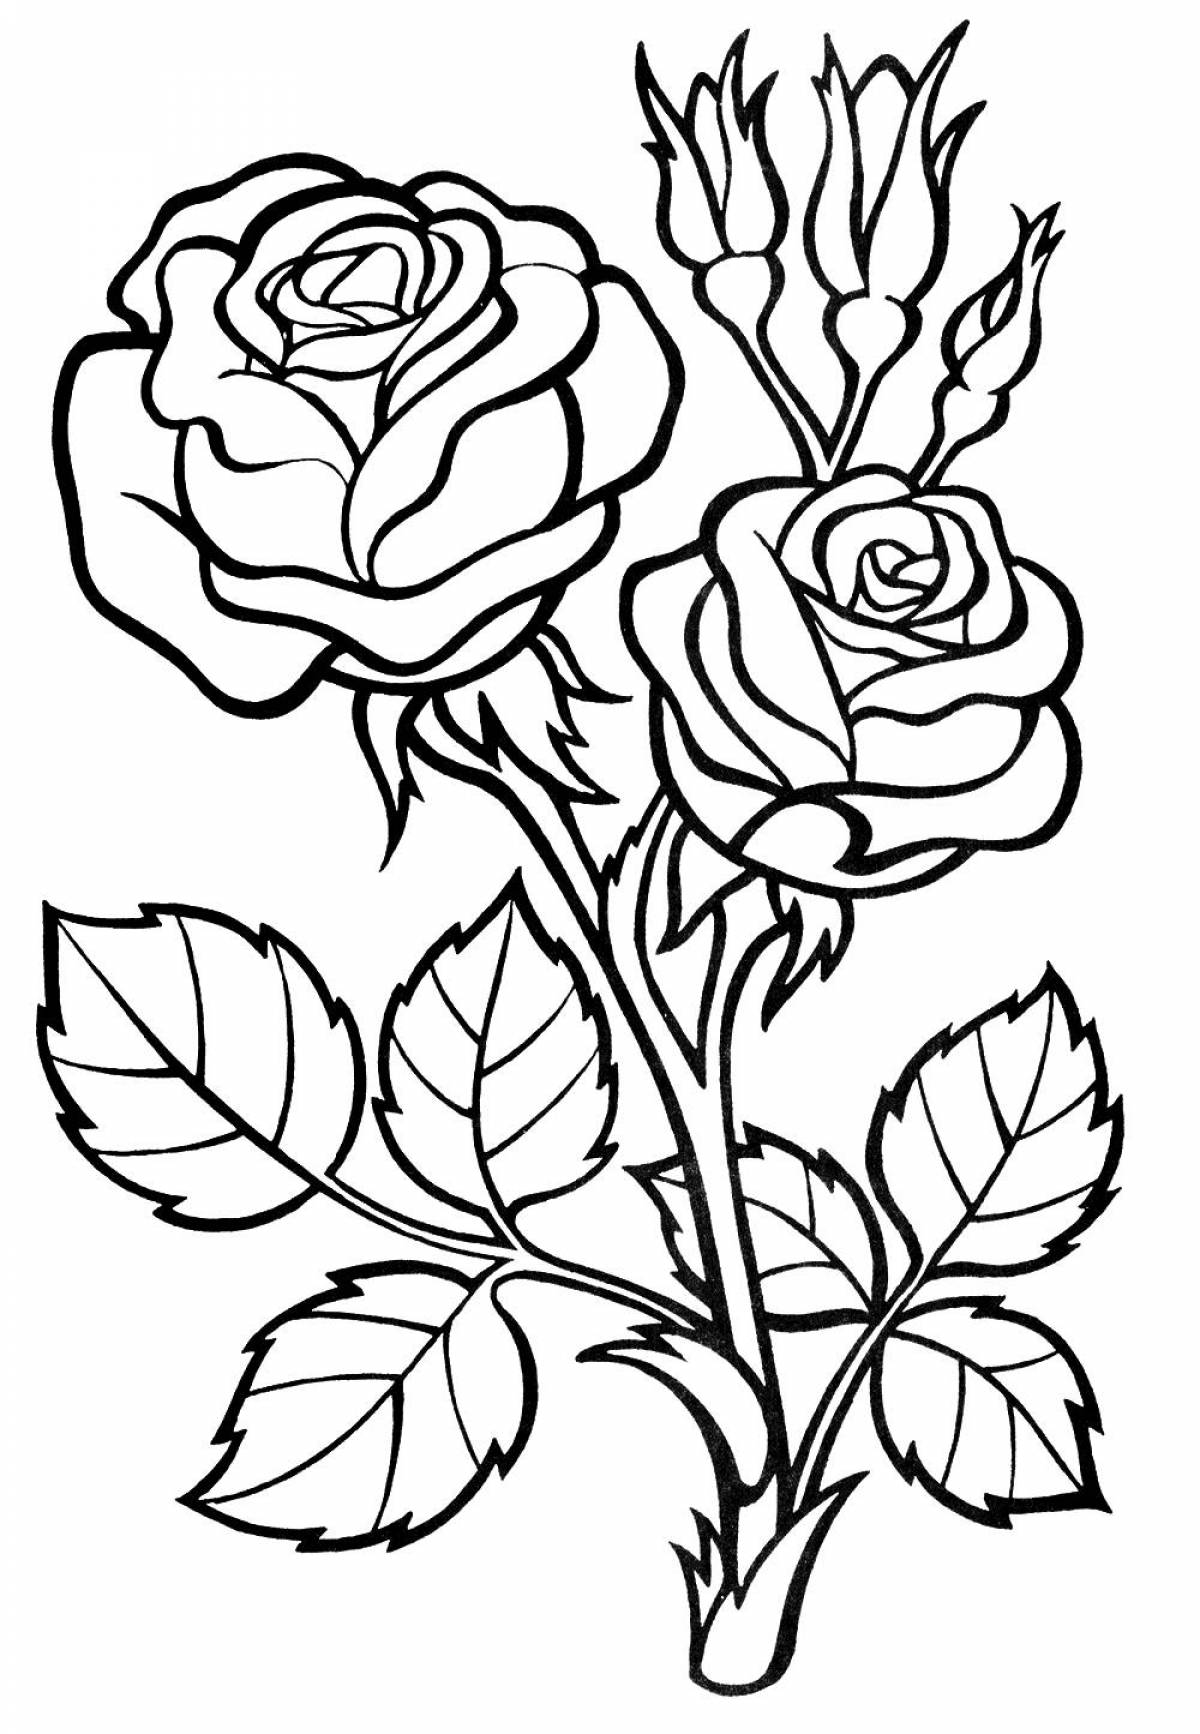 Coloring roses